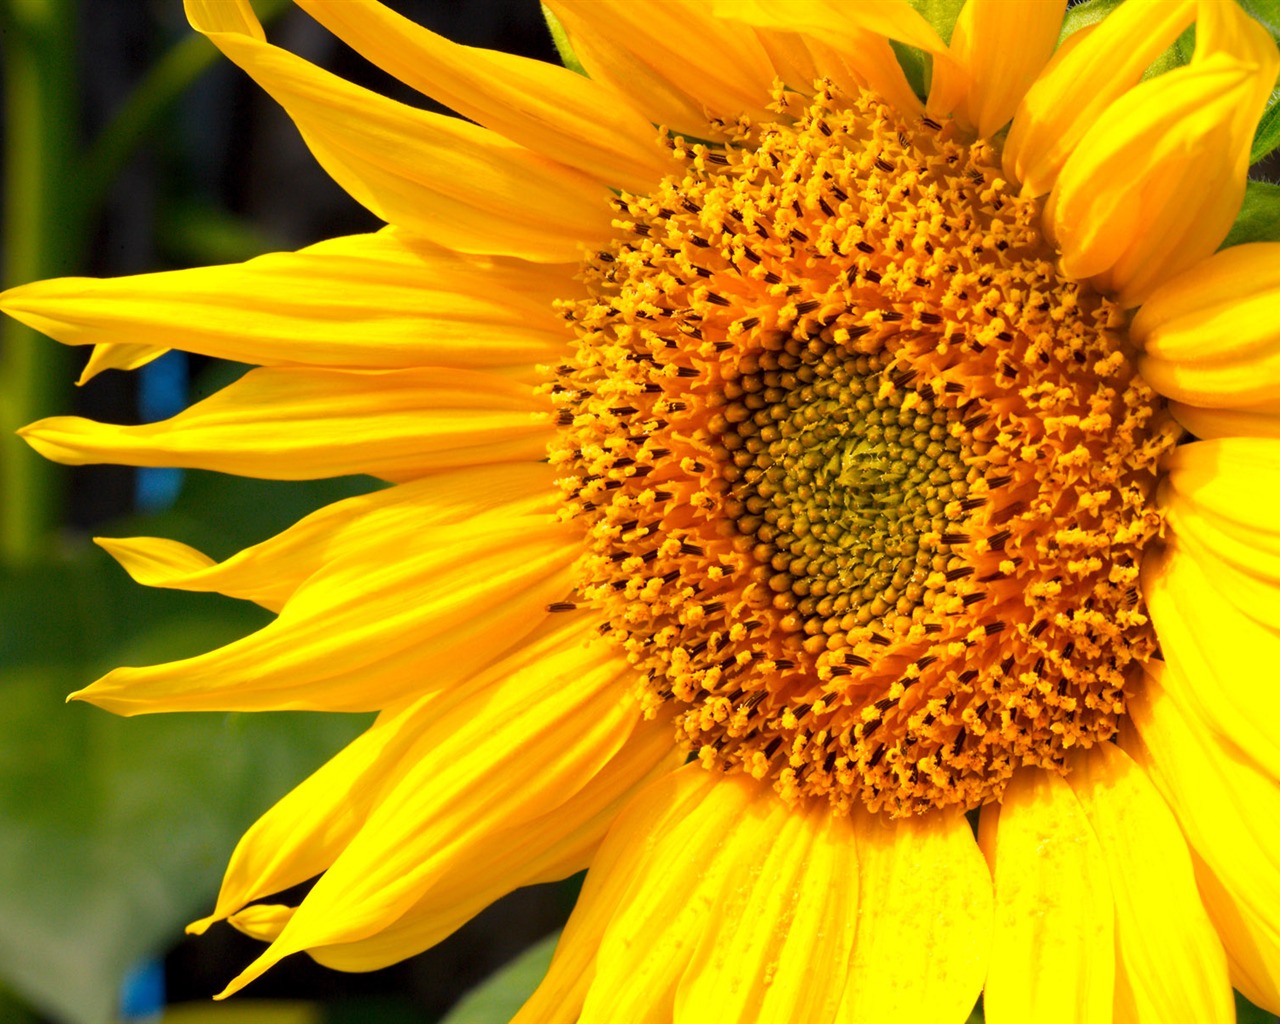 Sunny sunflower photo HD Wallpapers #37 - 1280x1024